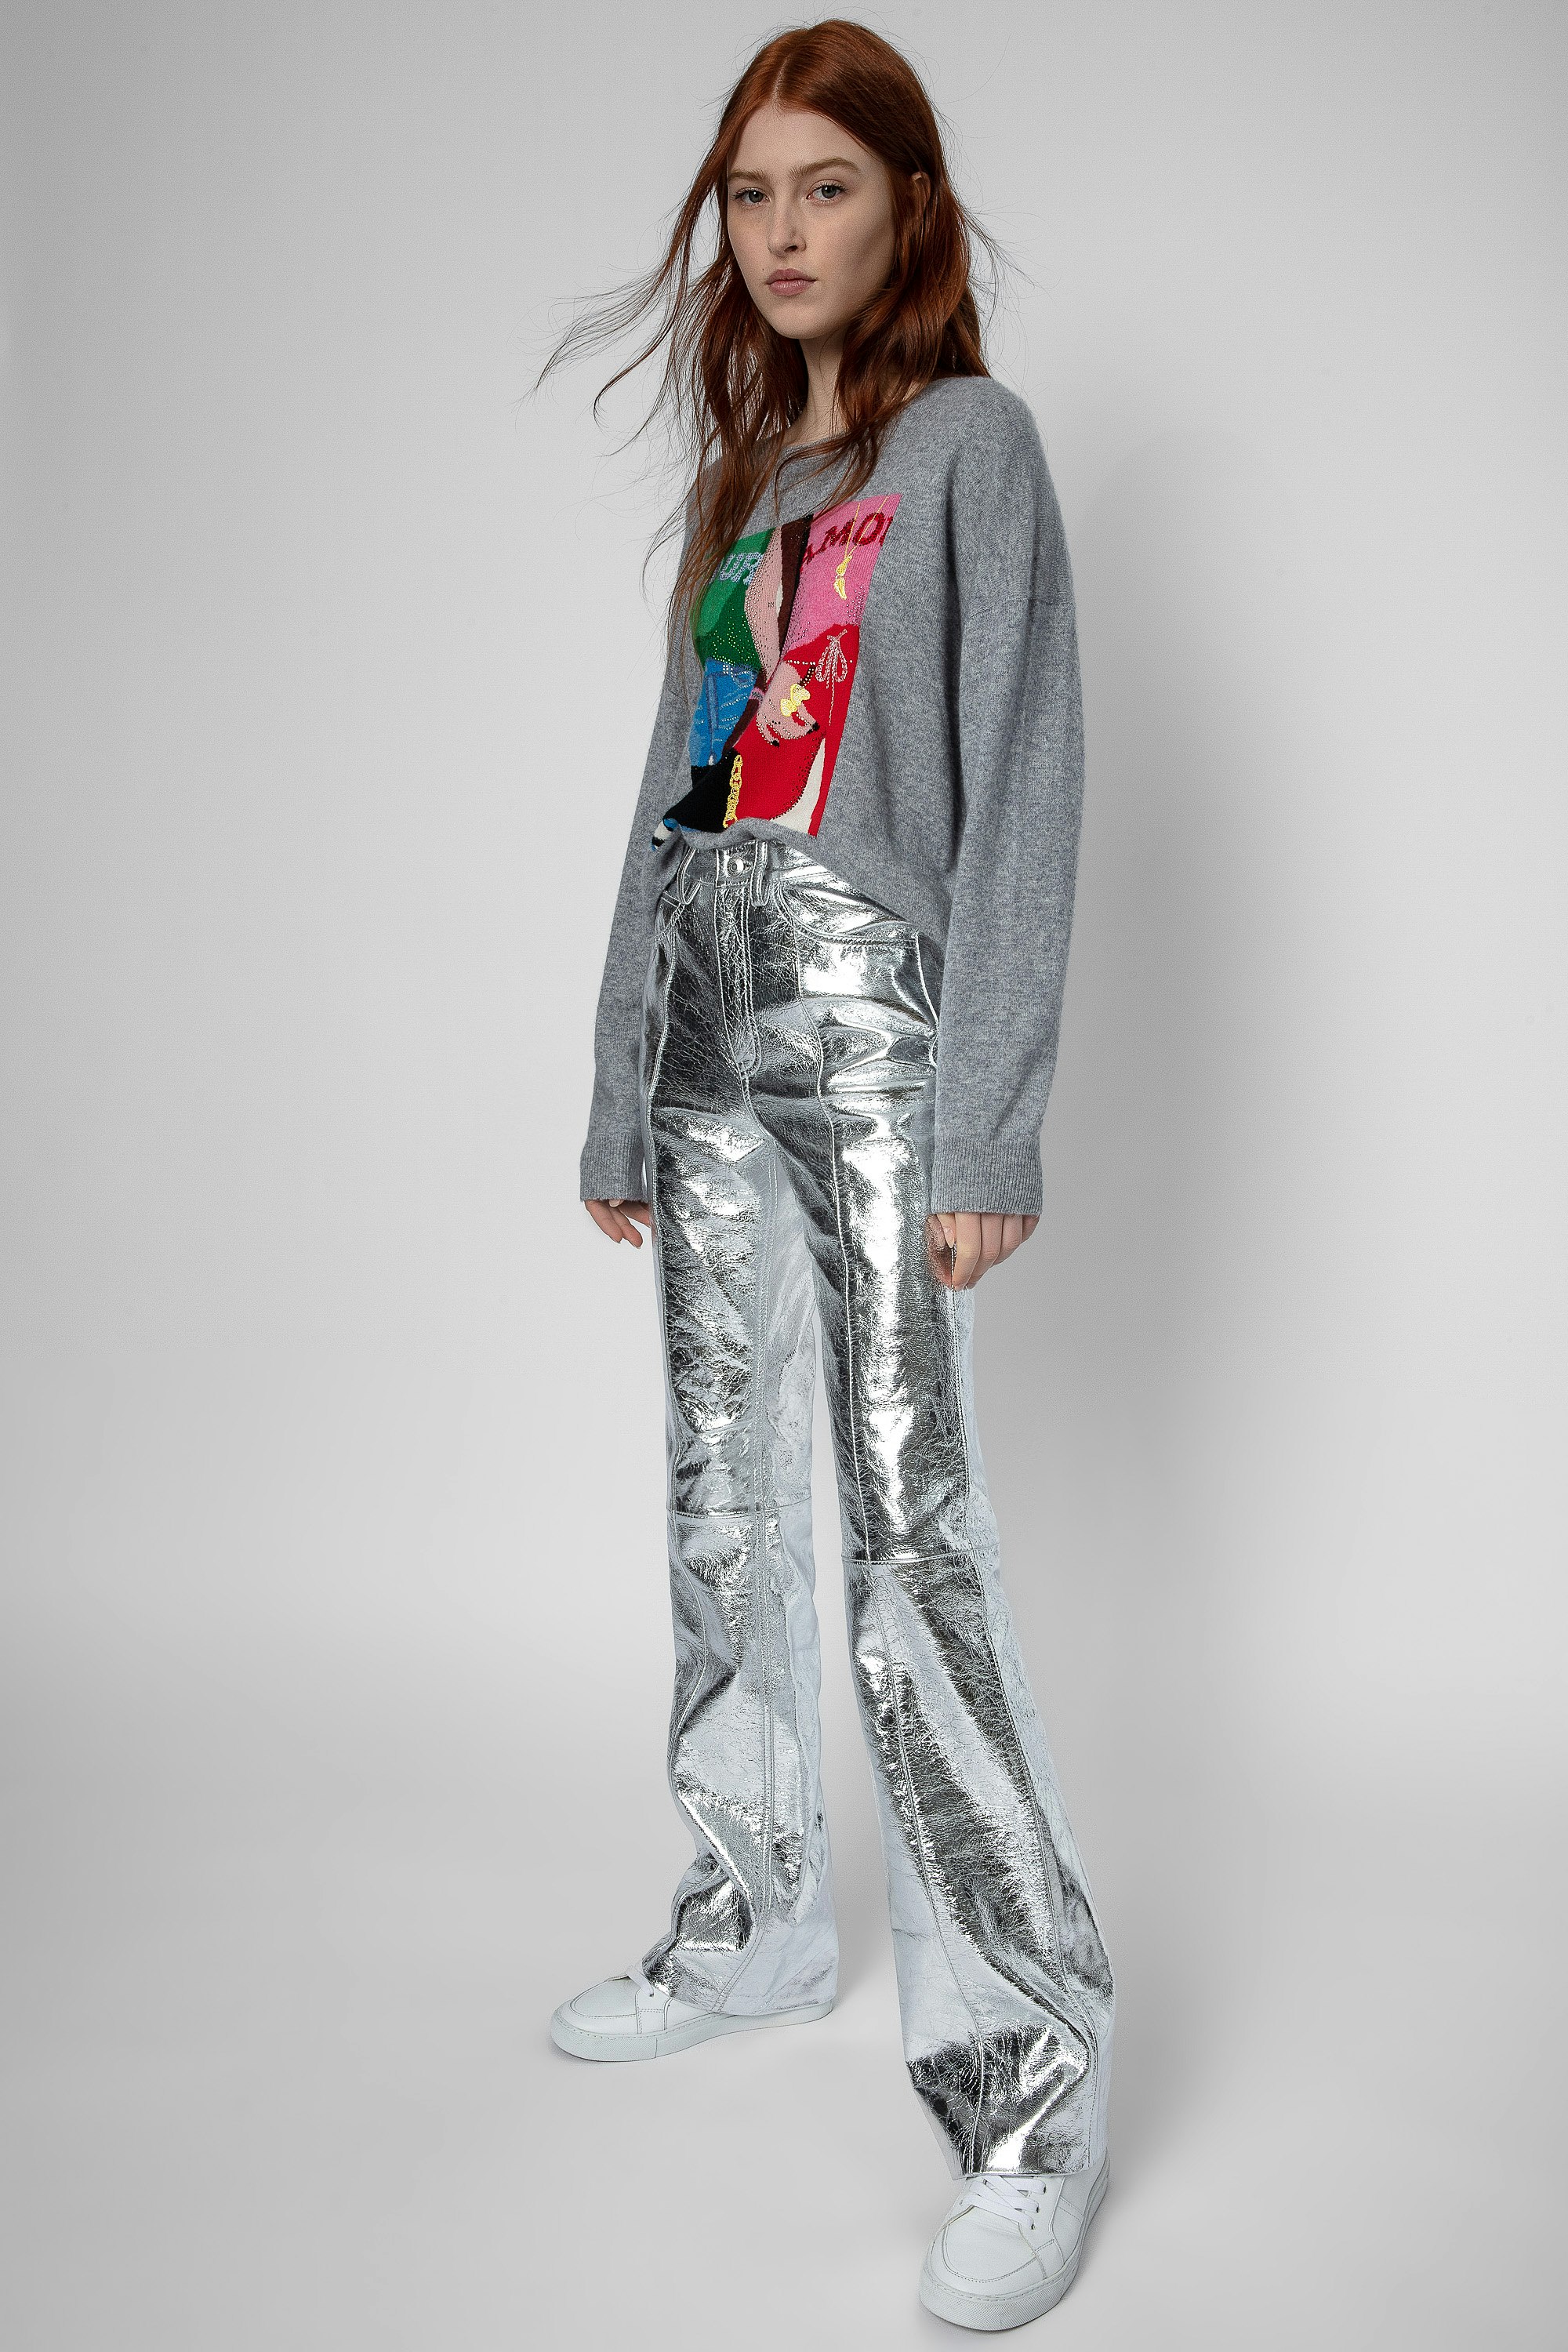 Leather Poete Trousers - Women’s silver-toned metallic leather straight-cut trousers